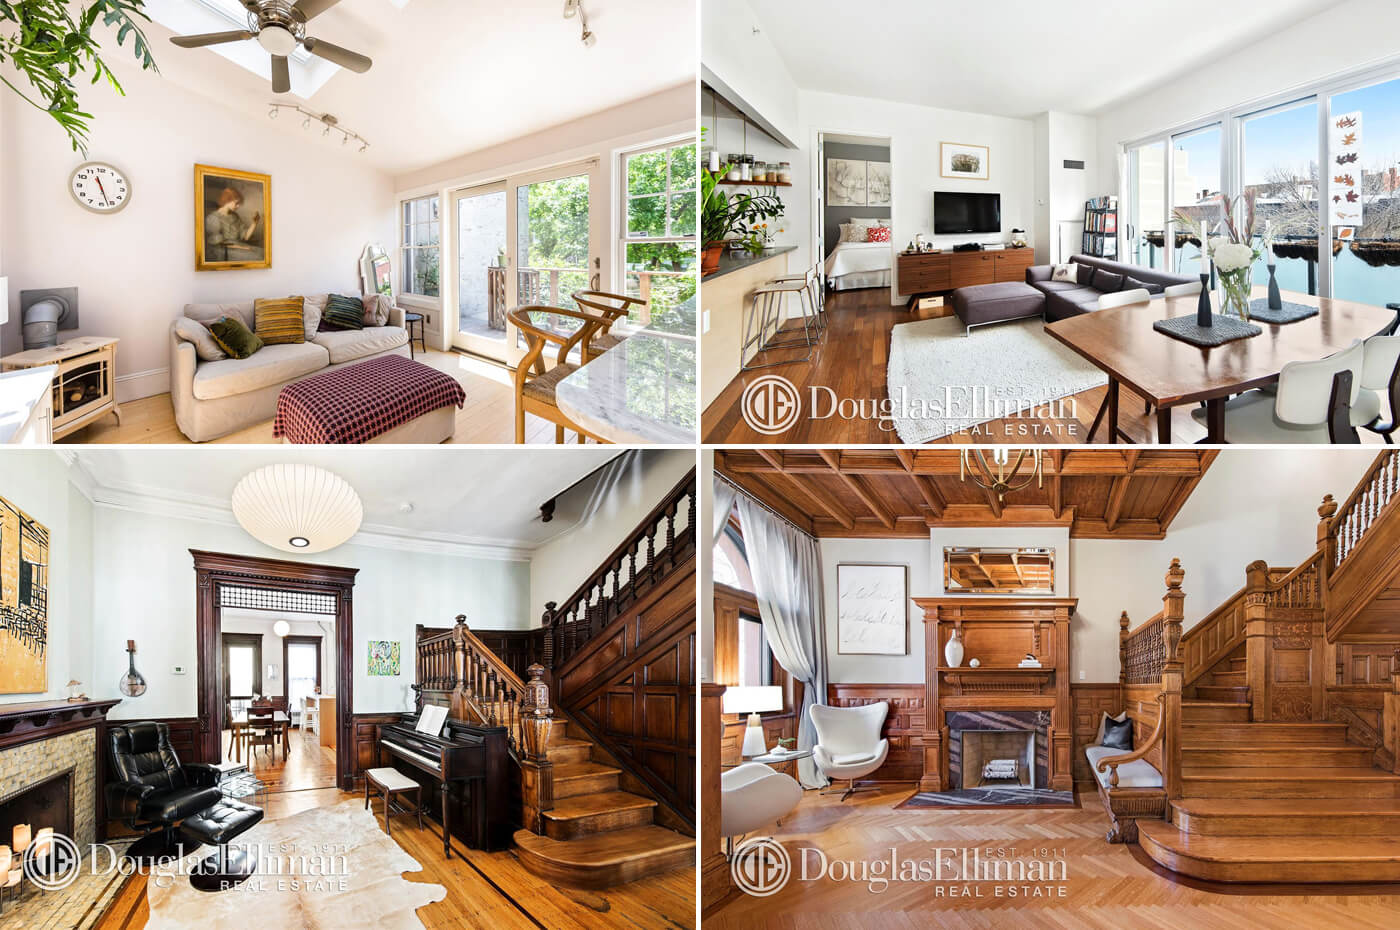 Brooklyn Homes for Sale Park Slope Fort Greene Crown Heights